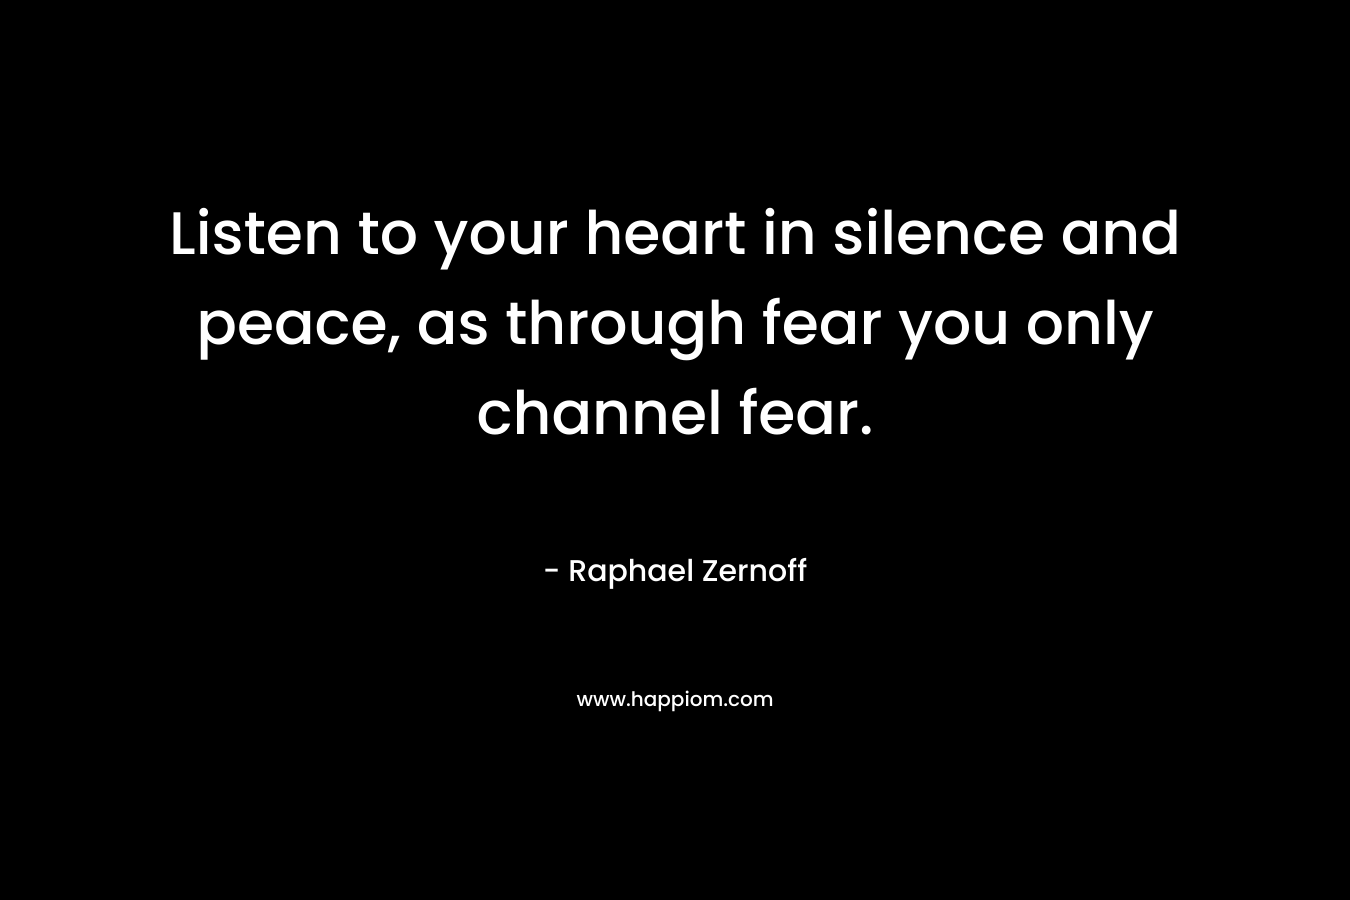 Listen to your heart in silence and peace, as through fear you only channel fear.